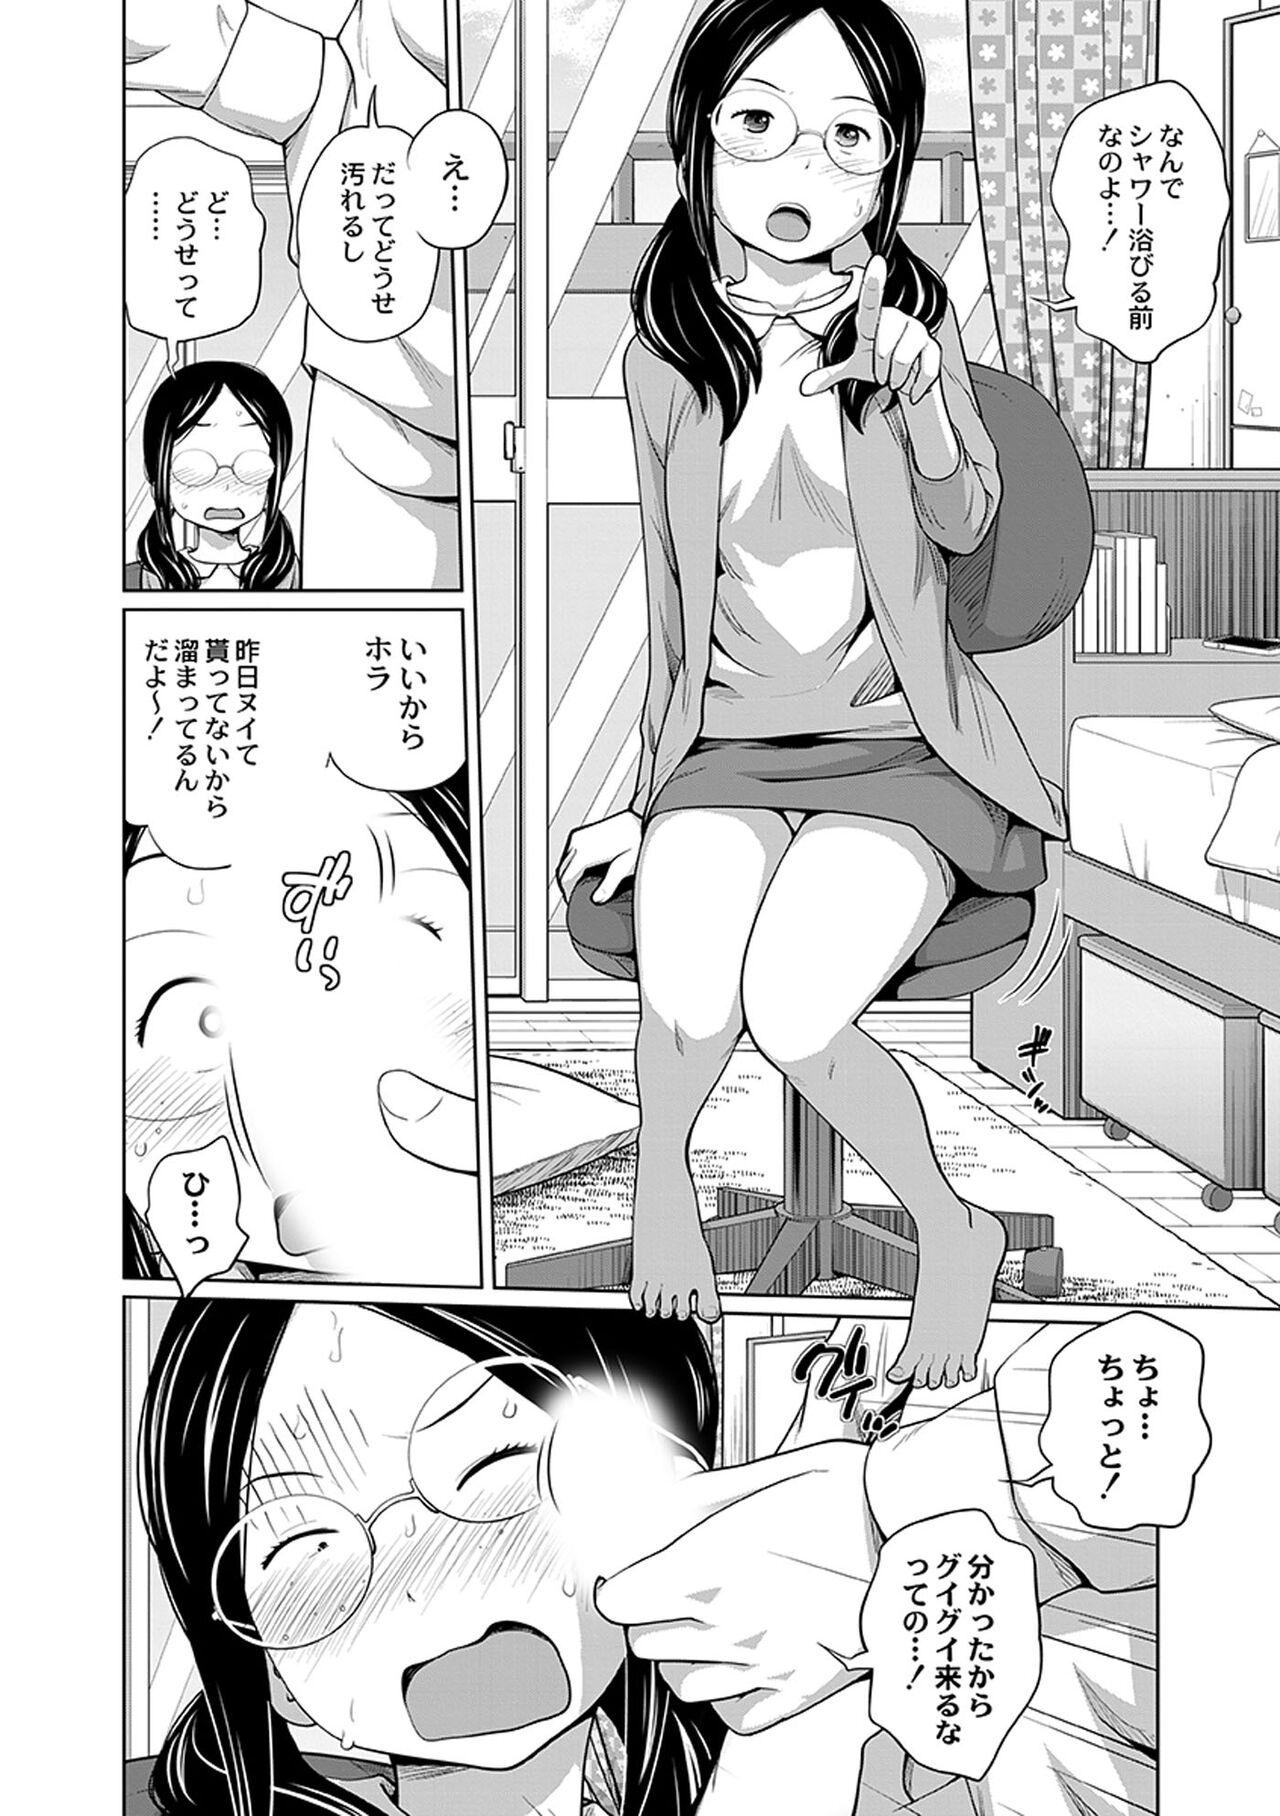 Shemale Sex Ane Megane - spectacled sister Private Sex - Page 6